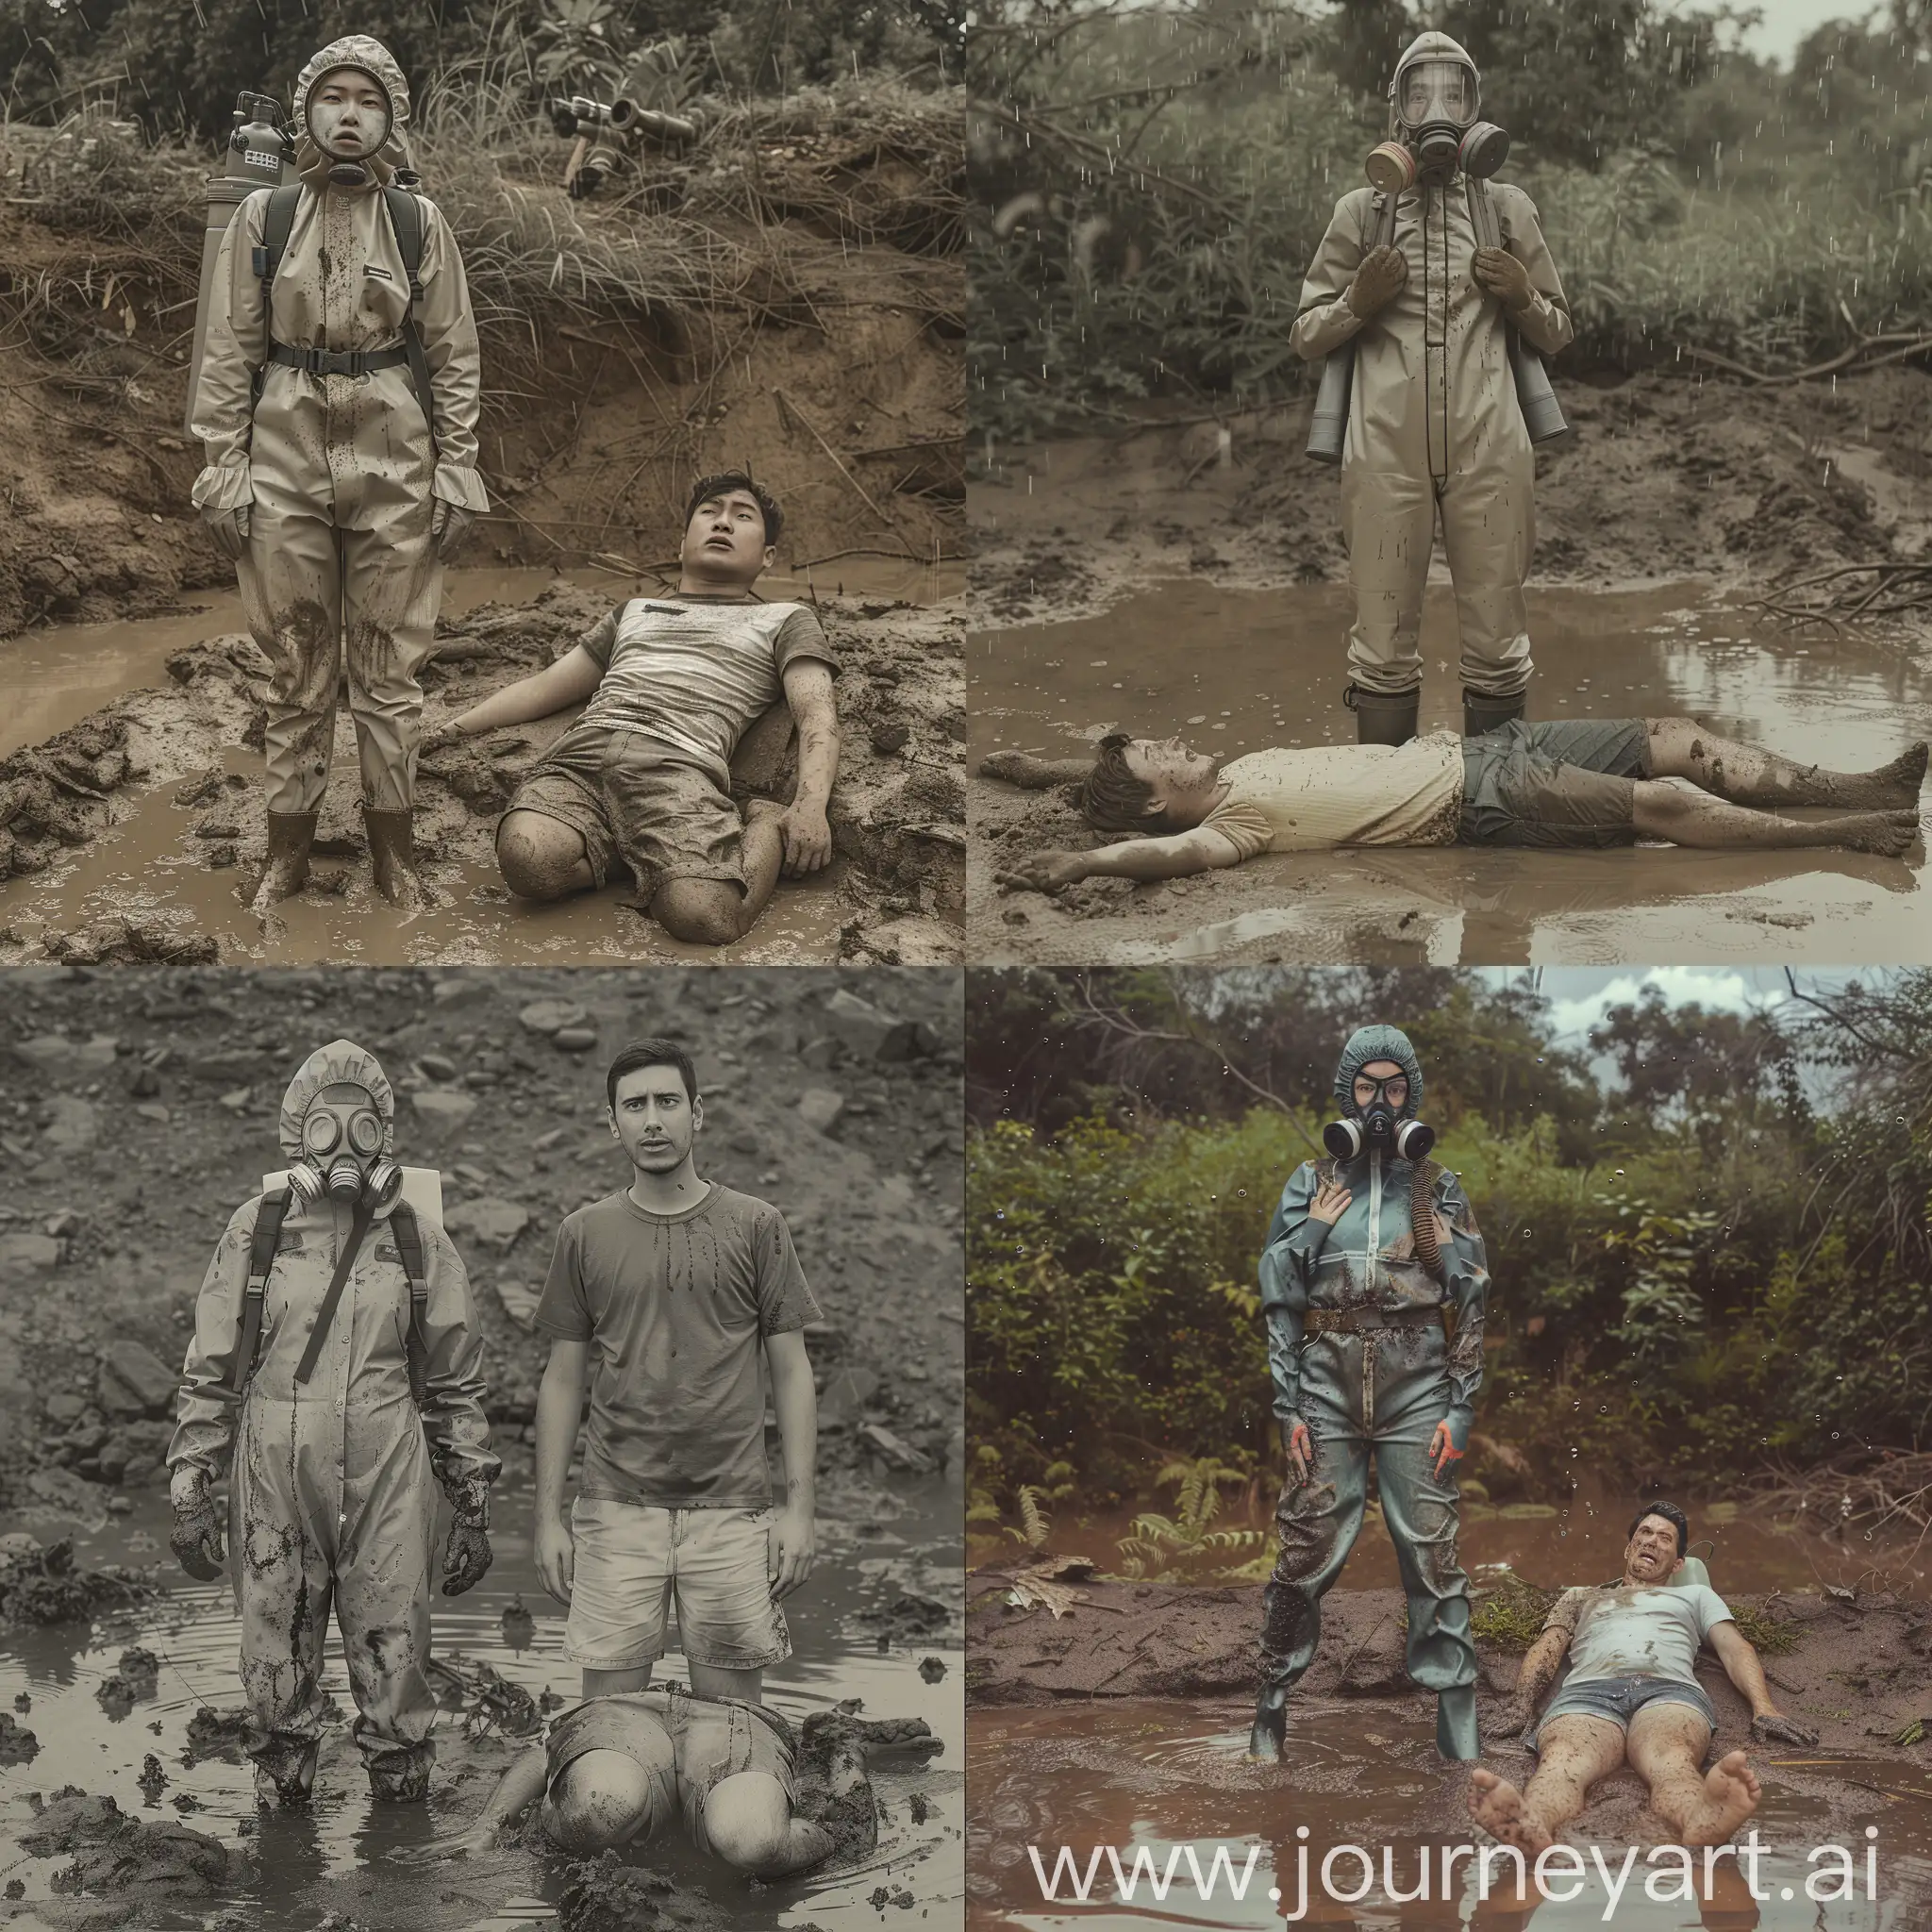 full-length colored photo of two persons, outdoor, rainy day, wet ground 
person 1: woman, protective gear, rubber overall, strong hazmat suit with hood, overall, fullbody, 3M fullface gasmask with visor, face covered with gasmask, oxygen tanks on the back, rubber gloves, rubber shoes, stand straight, hands on the chest, confident, drops of mud on suit, no exposed skin
person 2: man, casual shorts and t-shirt, lays on the ground in mud, scared